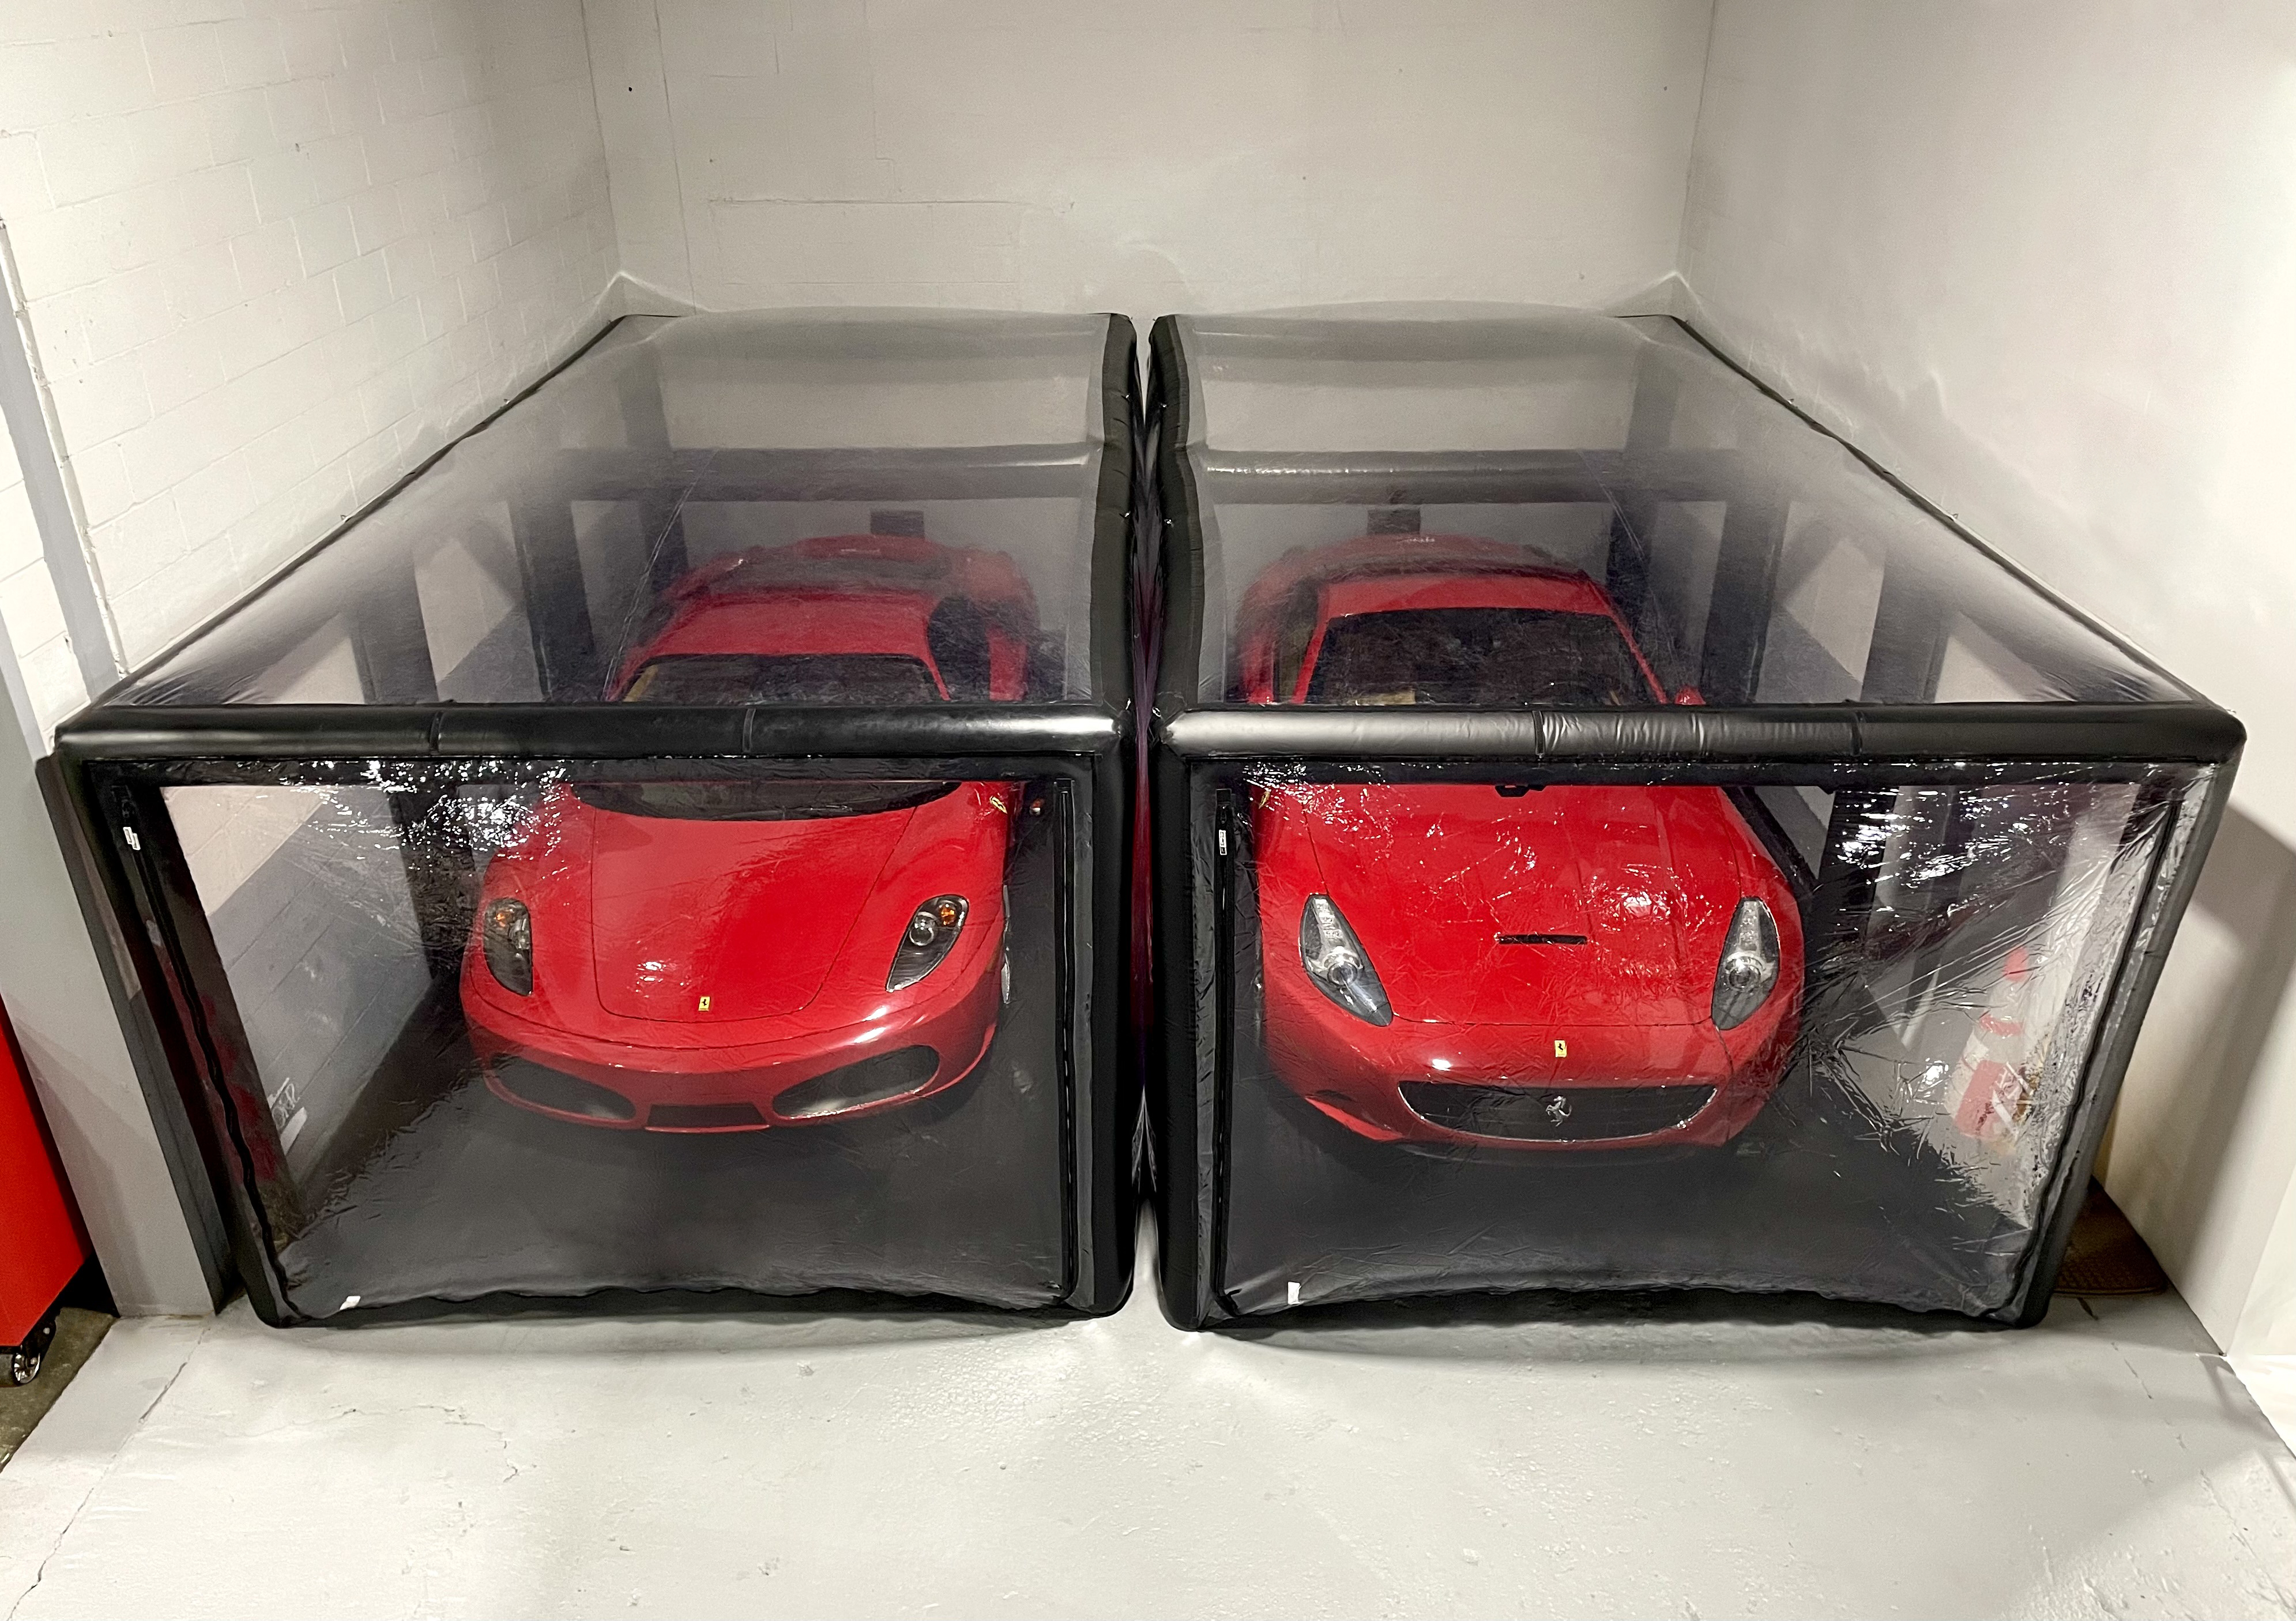 Two Ferraris in storage container